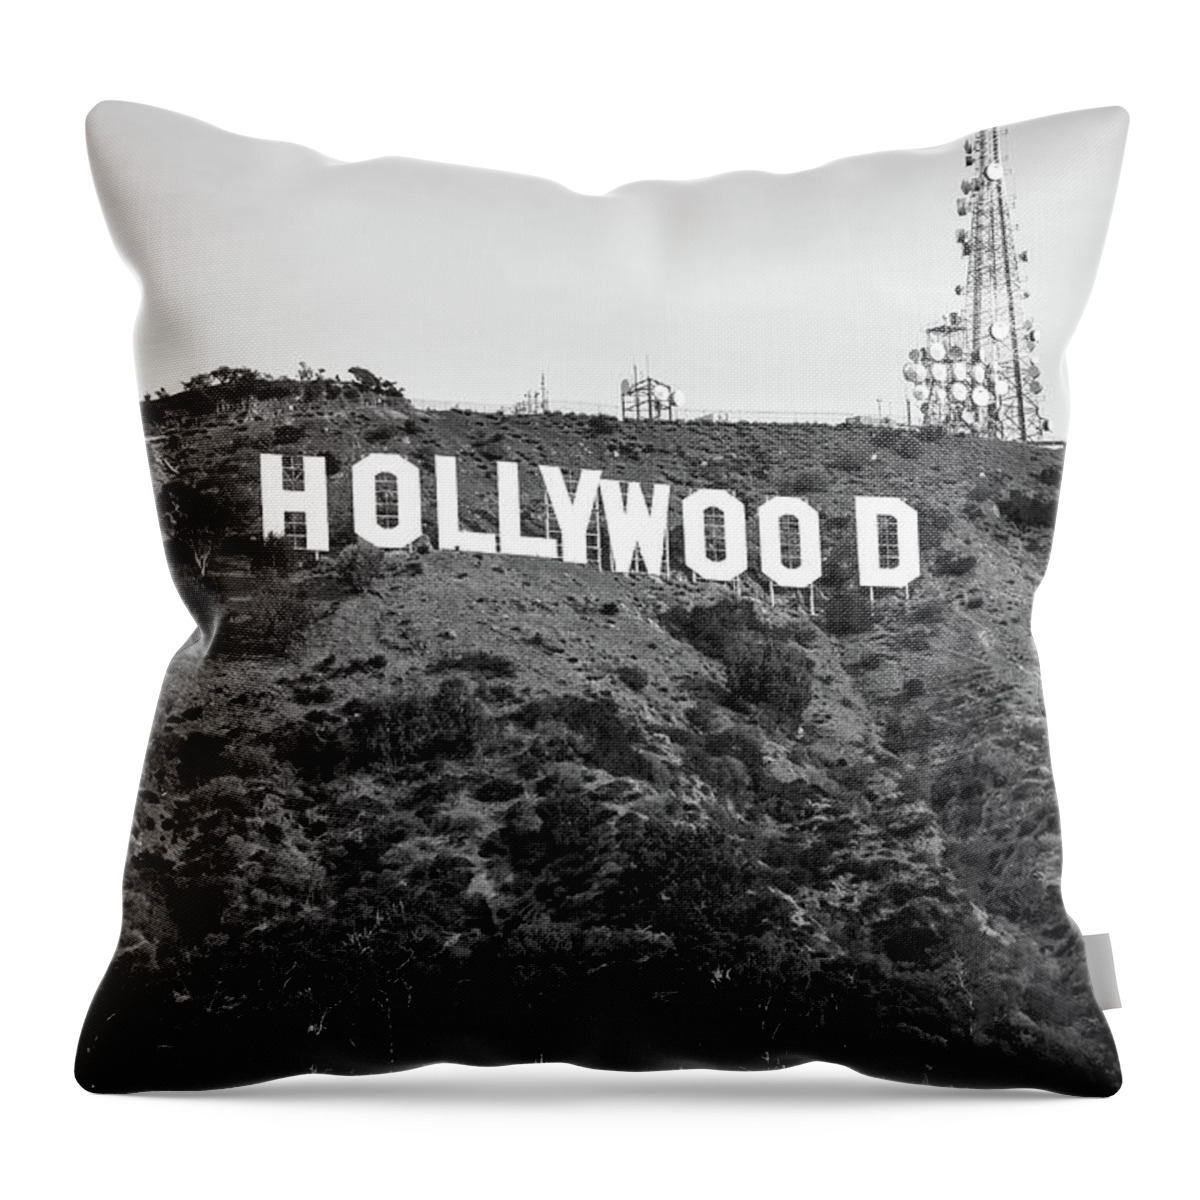 Hollywood Hills Throw Pillow featuring the photograph Hollywood Hills Monochrome Majesty by Gregory Ballos